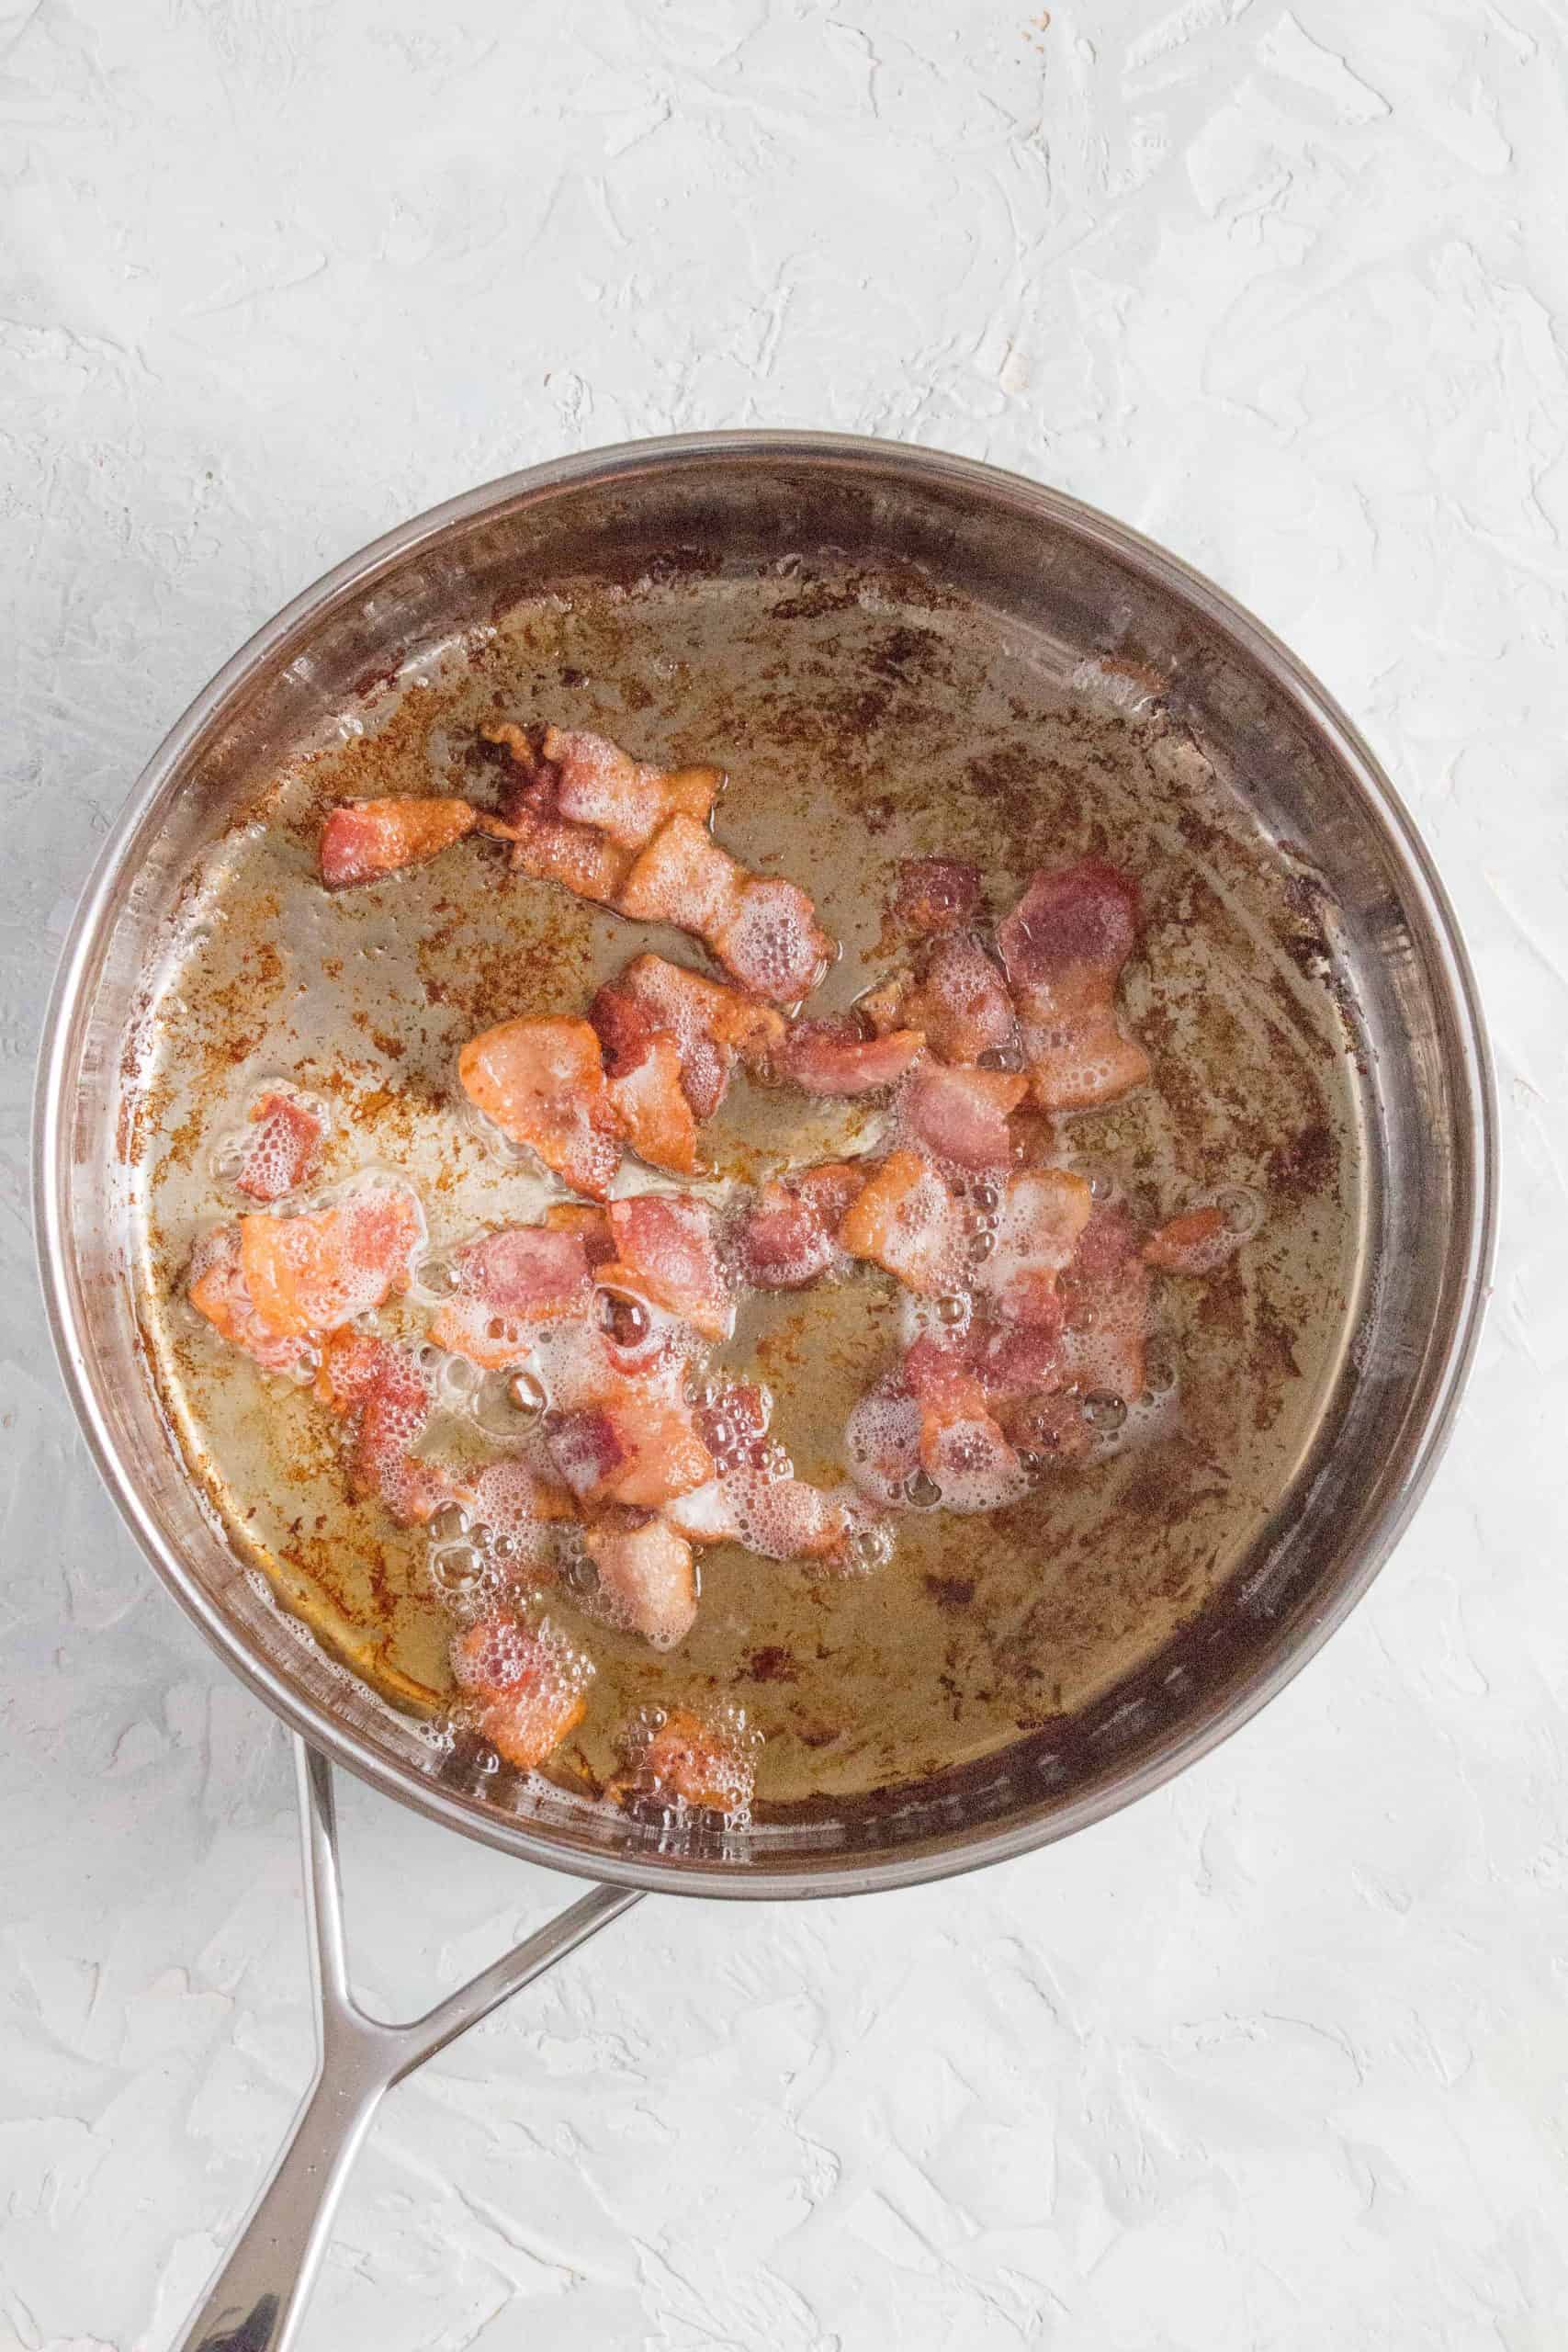 While the water is boiling, in a medium sized pan, fry your bacon until crispy.